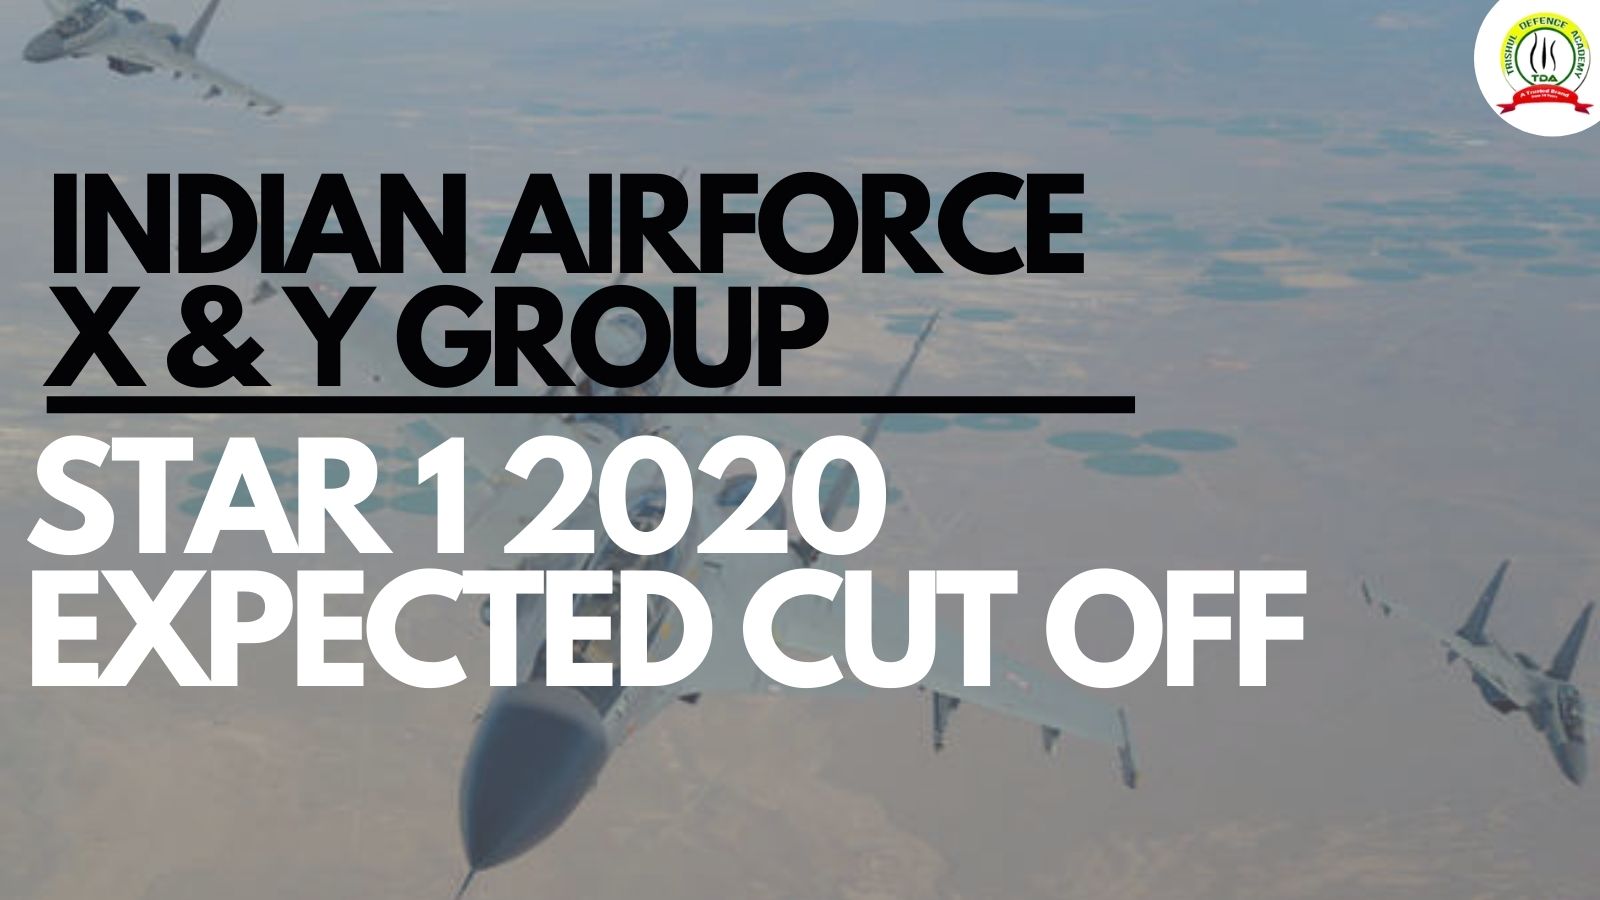 INDIAN AIRFORCE X & Y GROUP STAR 1 2020 EXPECTED CUT OFF